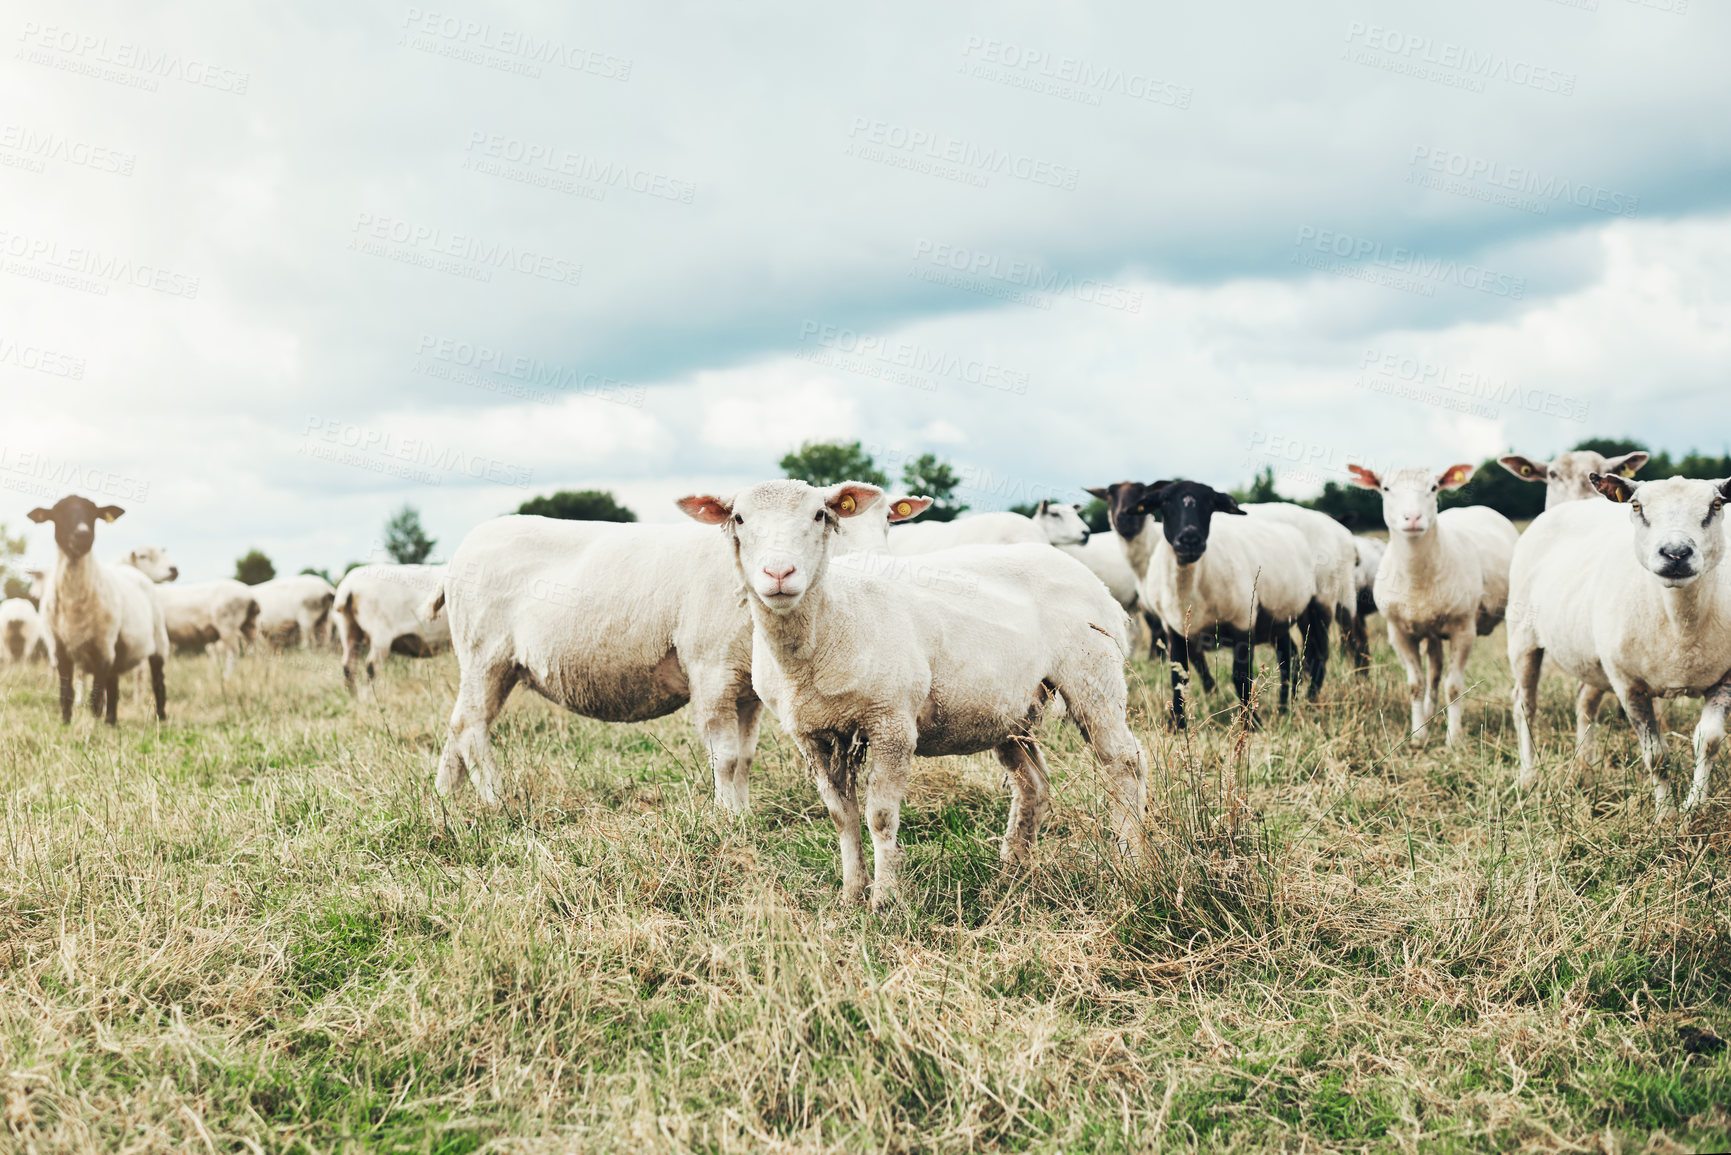 Buy stock photo Shot of a herd of sheep grazing peacefully on a green  field outside at a farm during the day